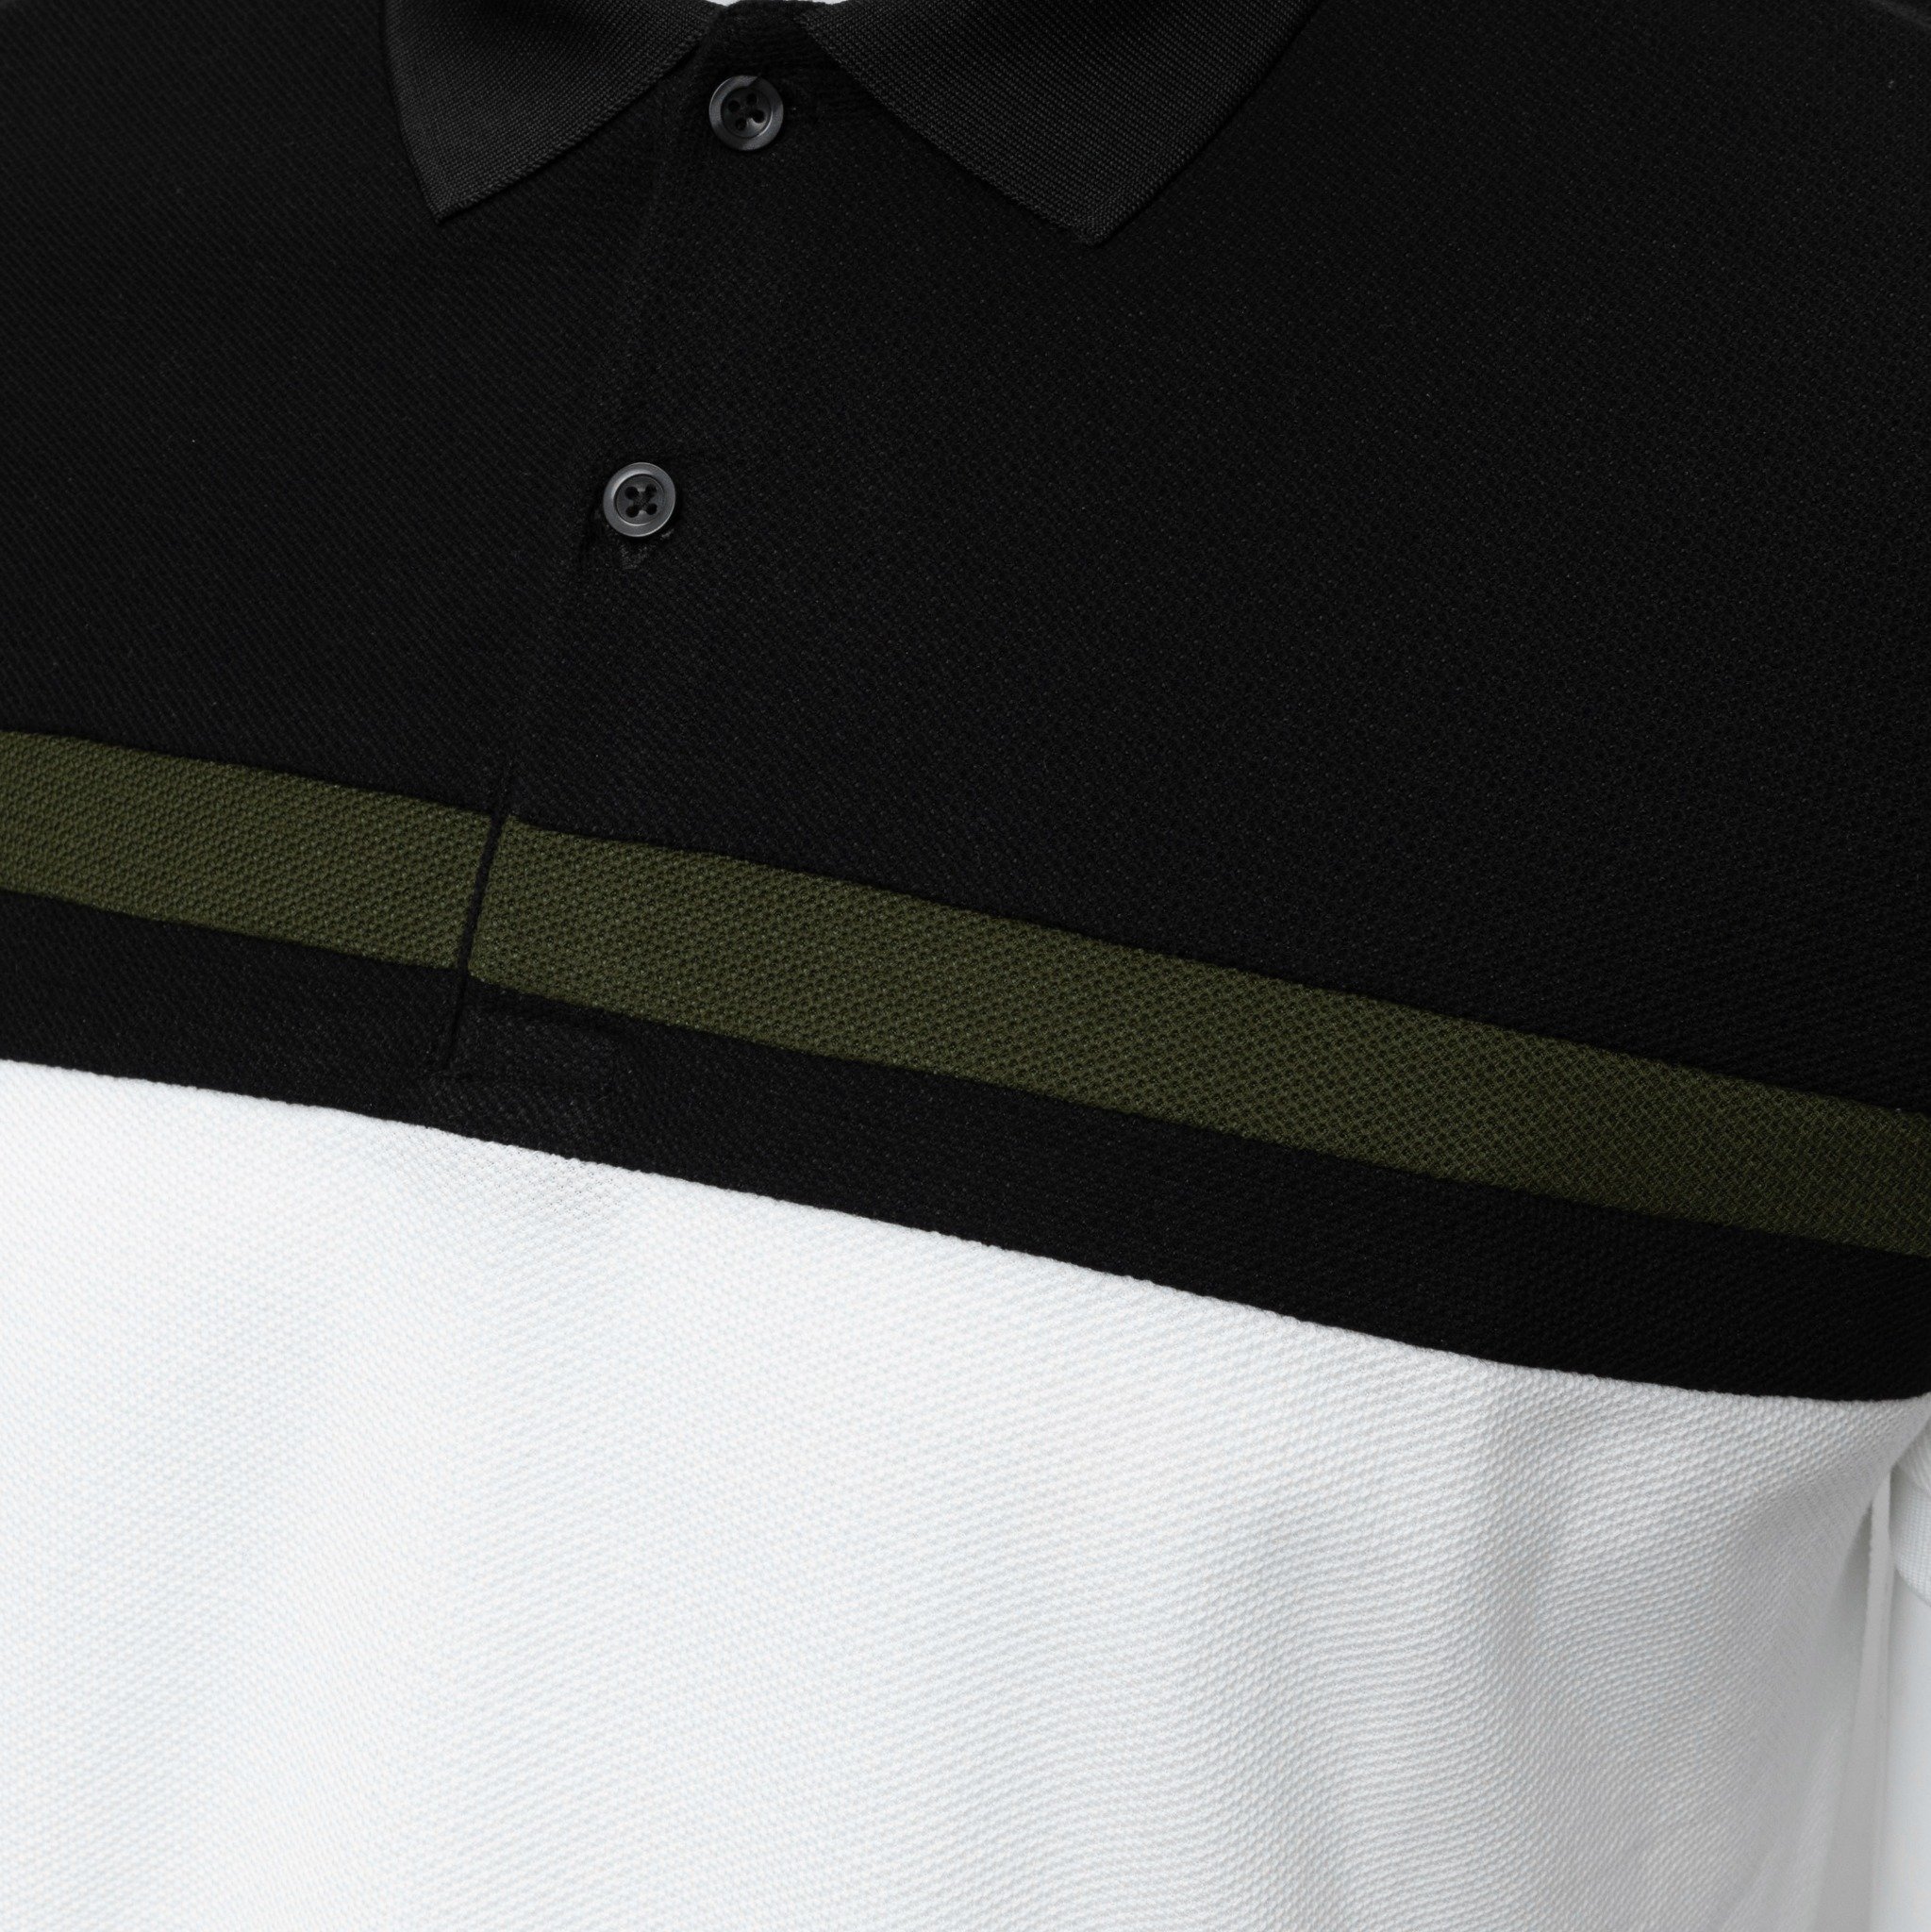 T43 FACTORY SLIMFIT NEW STRIPED CHEST POLO - BLACK